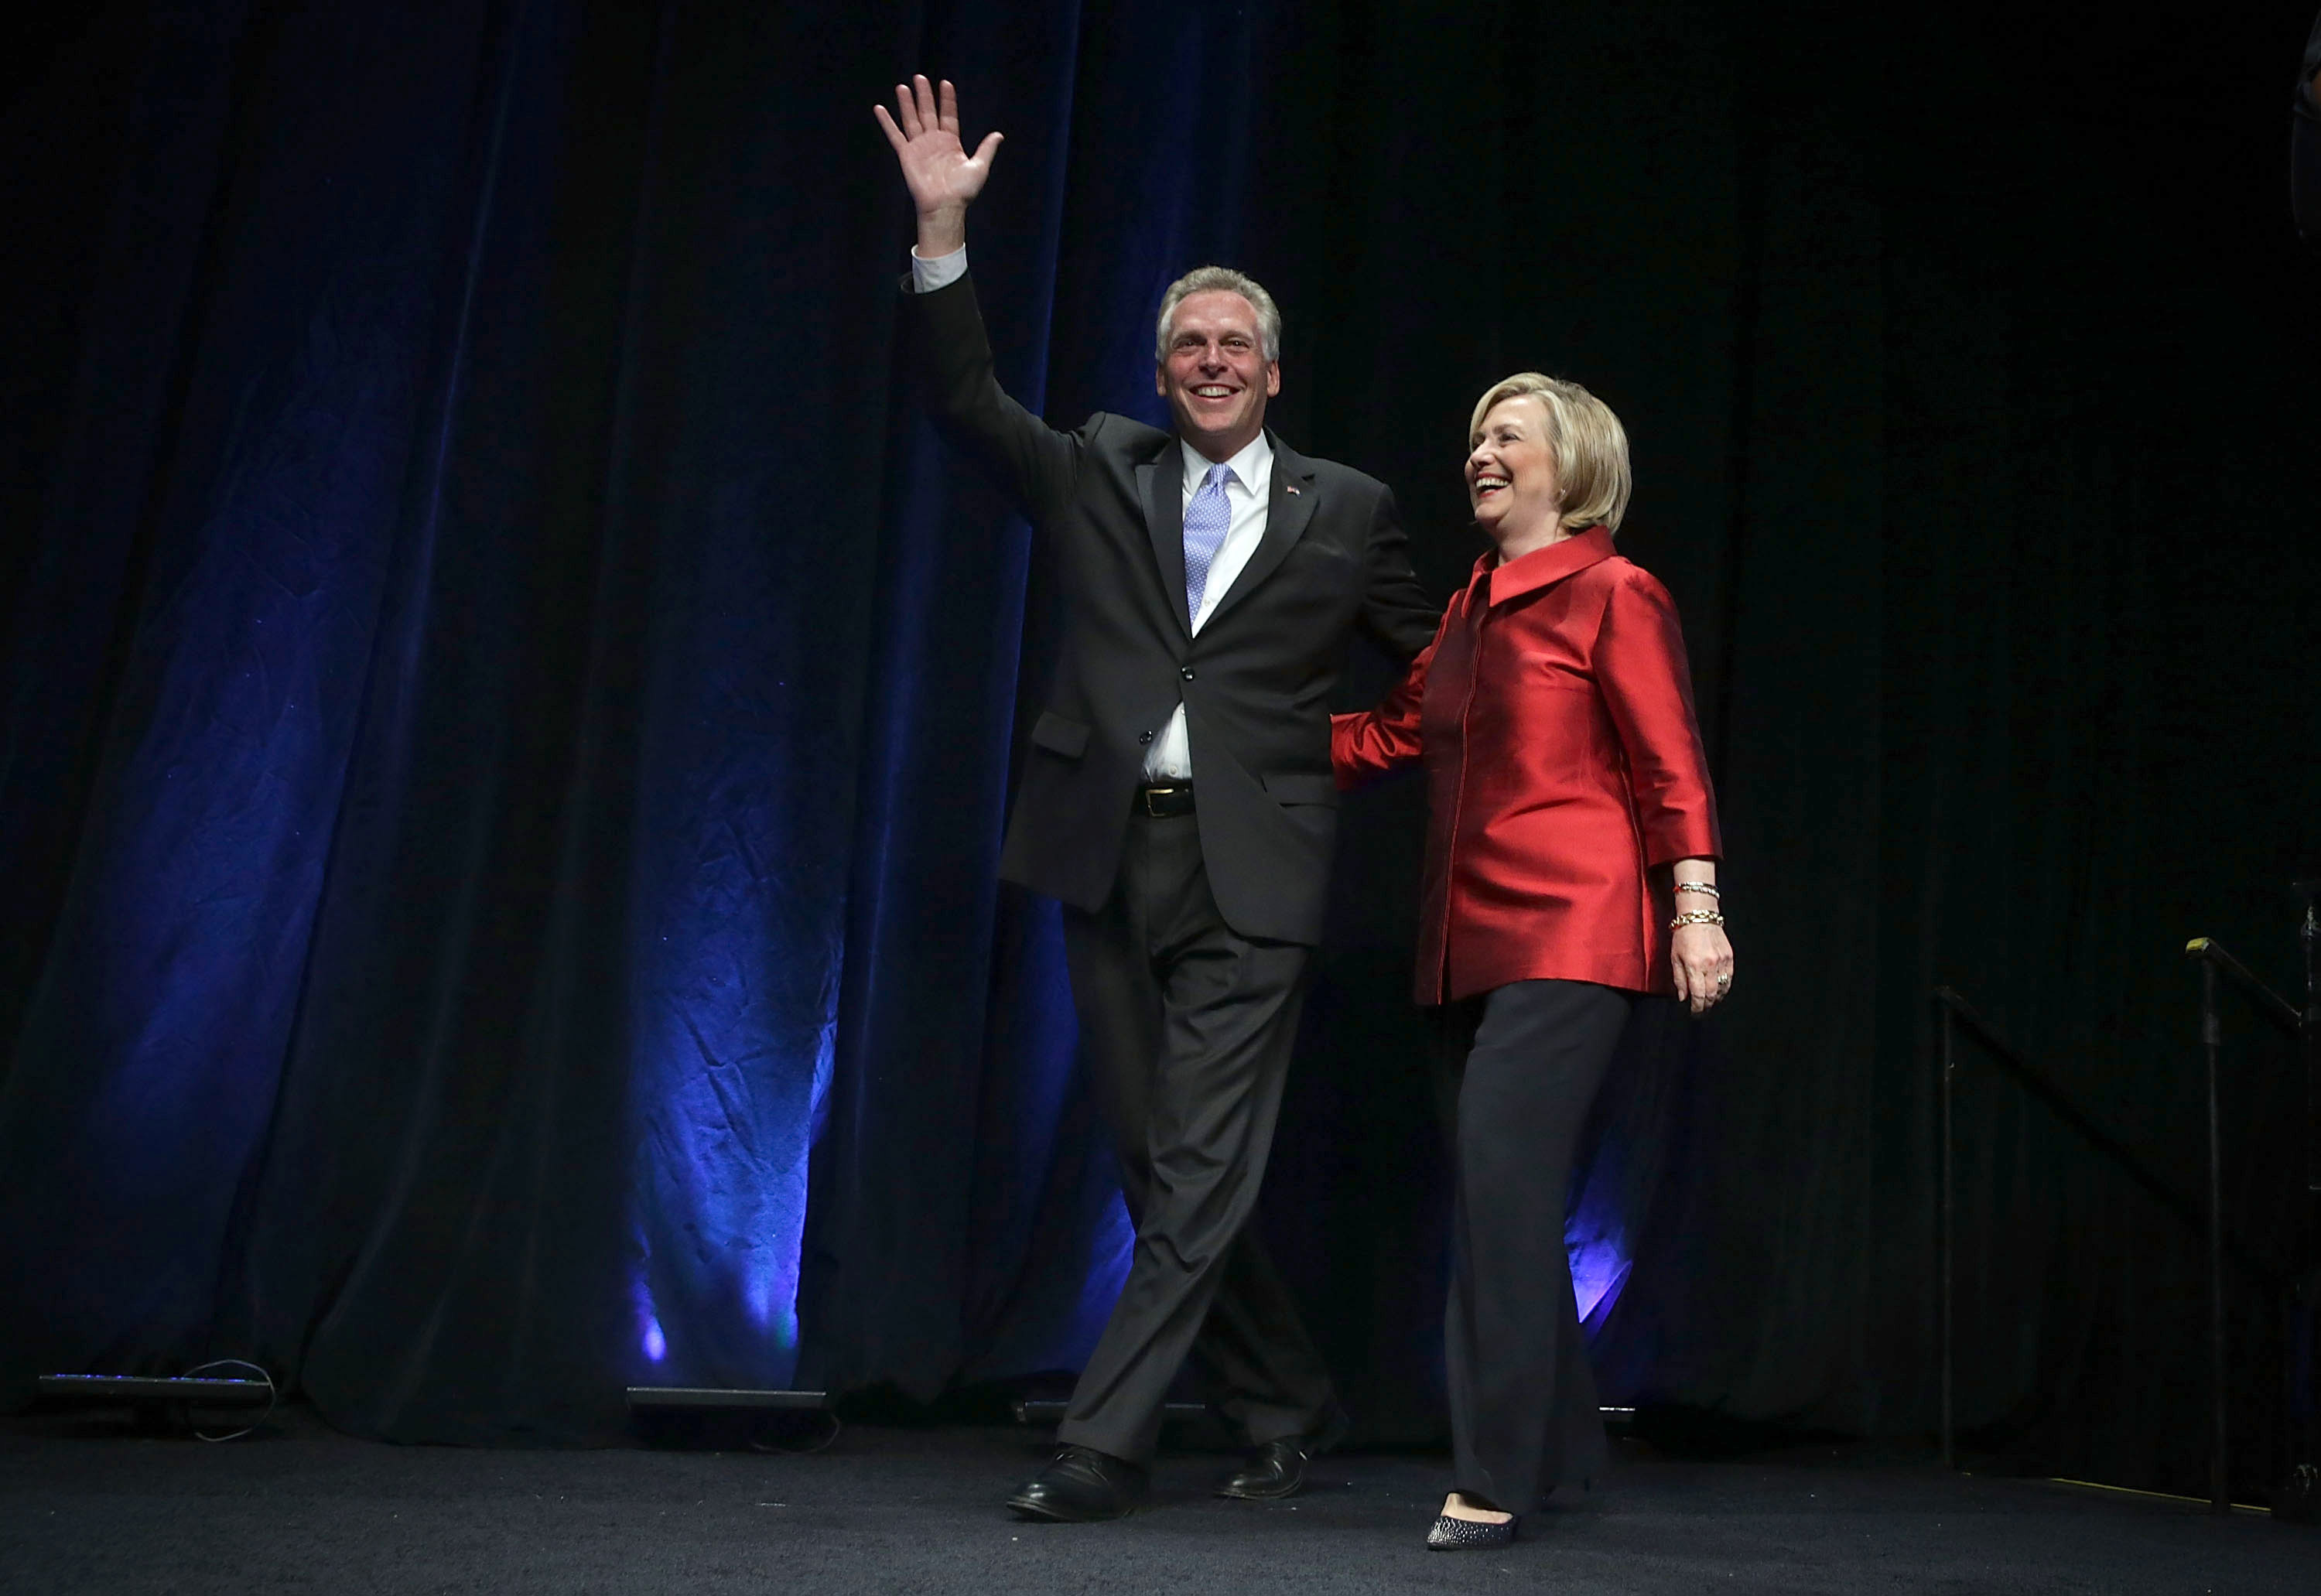 Democratic U.S. presidential hopeful and former U.S. Secretary of the State Hillary Clinton comes on the stage with Virginia Governor Terry McAuliffe during the Democratic Party of Virginia Jefferson-Jackson dinner June 26, 2015 at George Mason University's Patriot Center in Fairfax, Virginia. (Alex Wong&mdash;Getty Images)